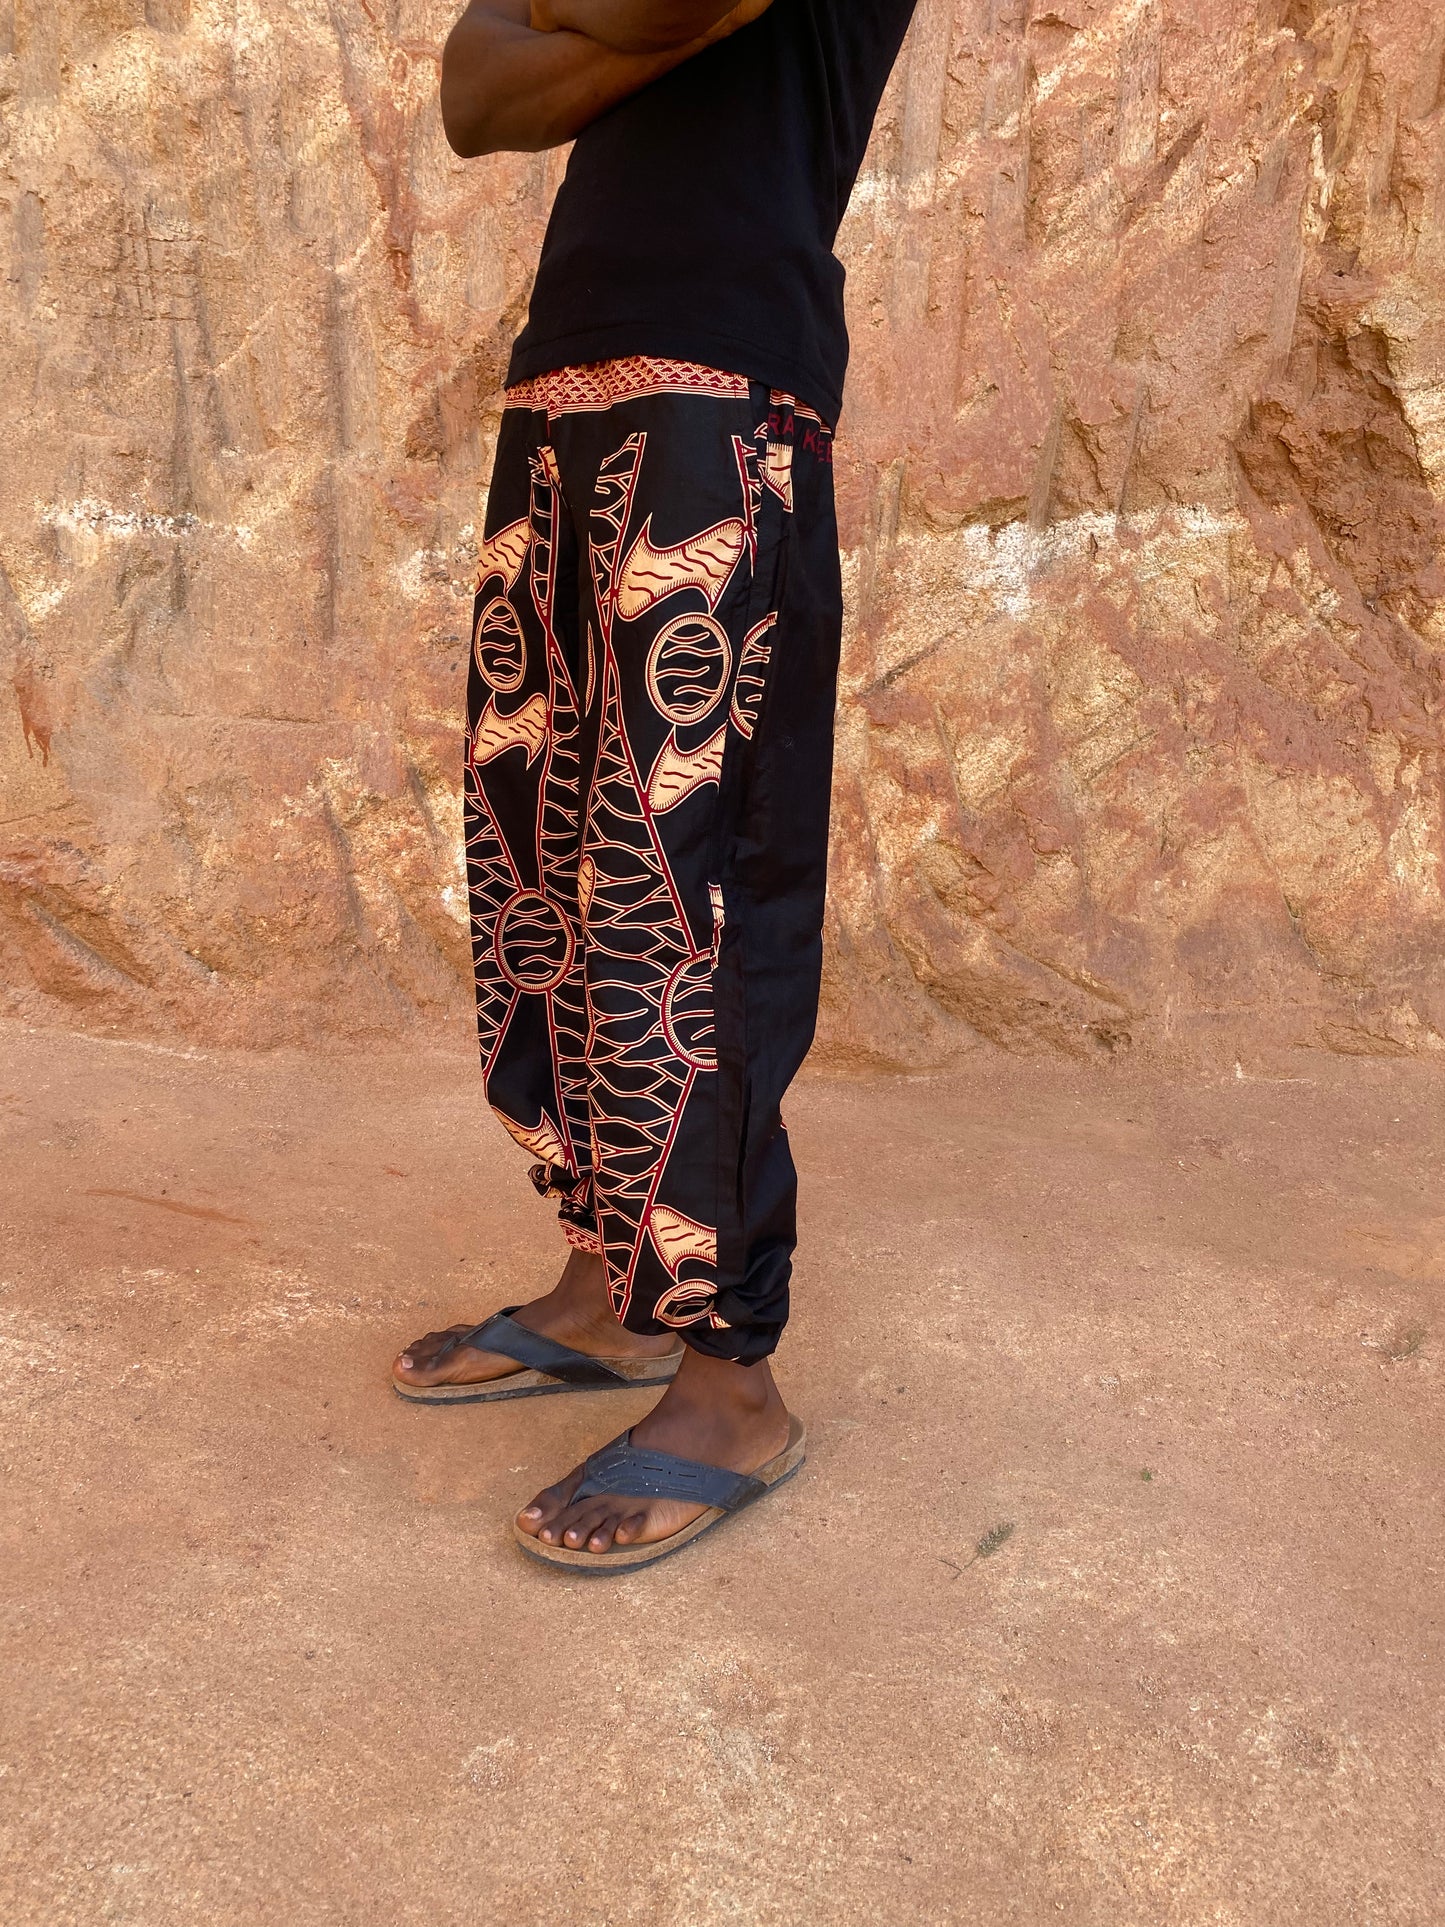 Fenuku S_1 / long joggers / padded waist band / graphic black_red